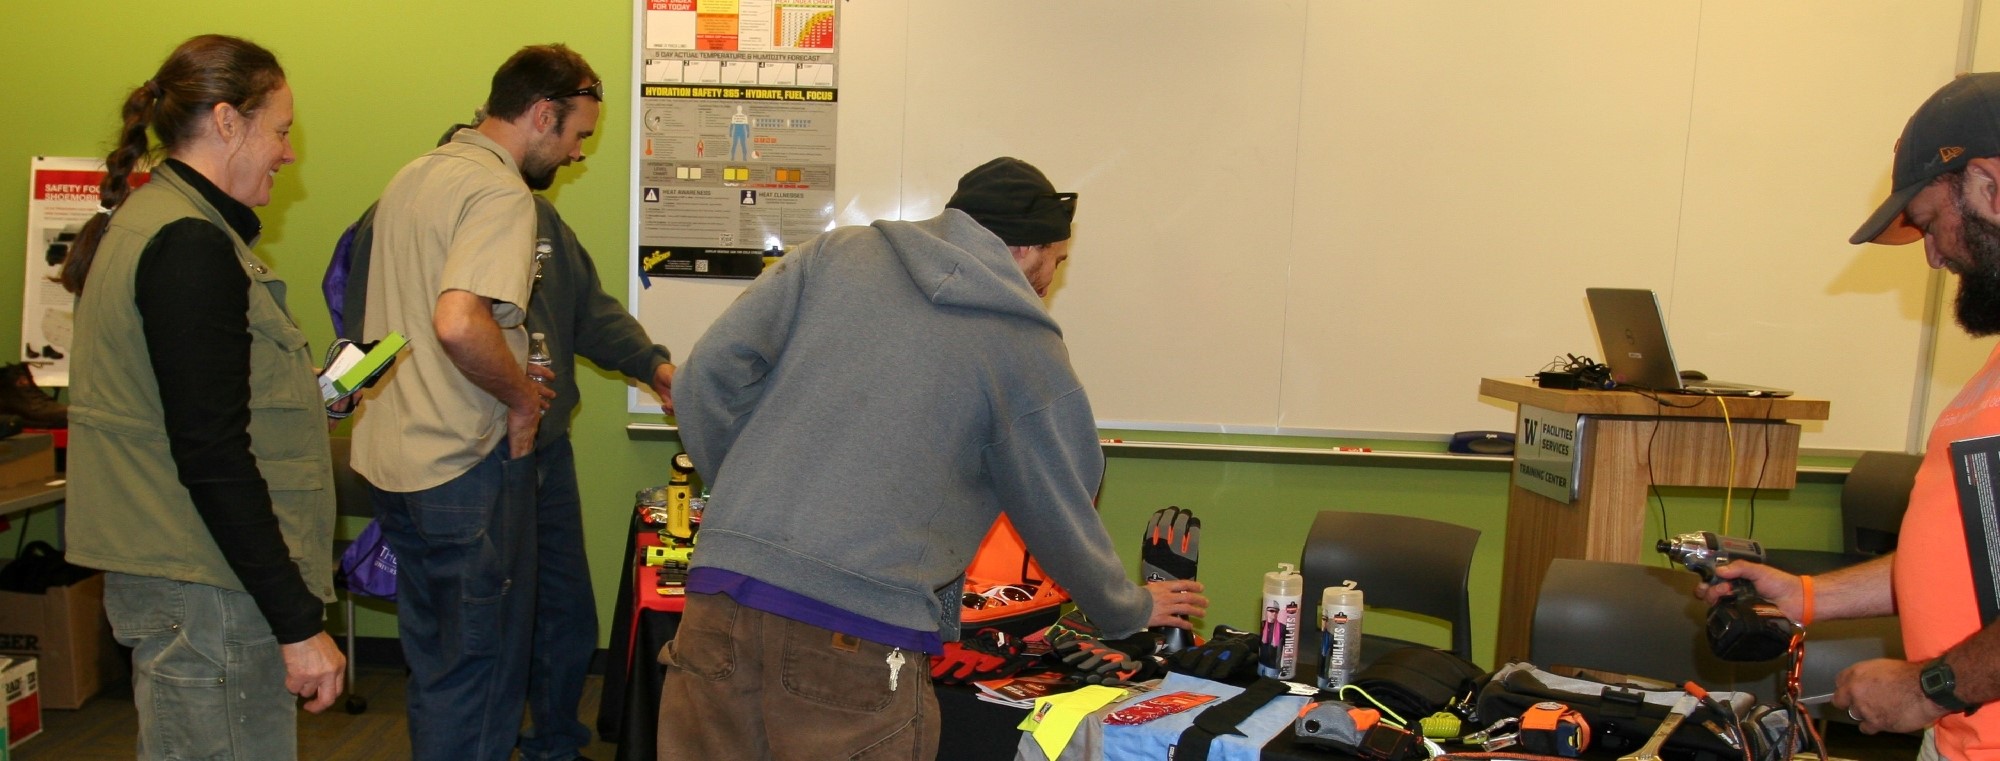 Facilities Services employees examine safety equipment